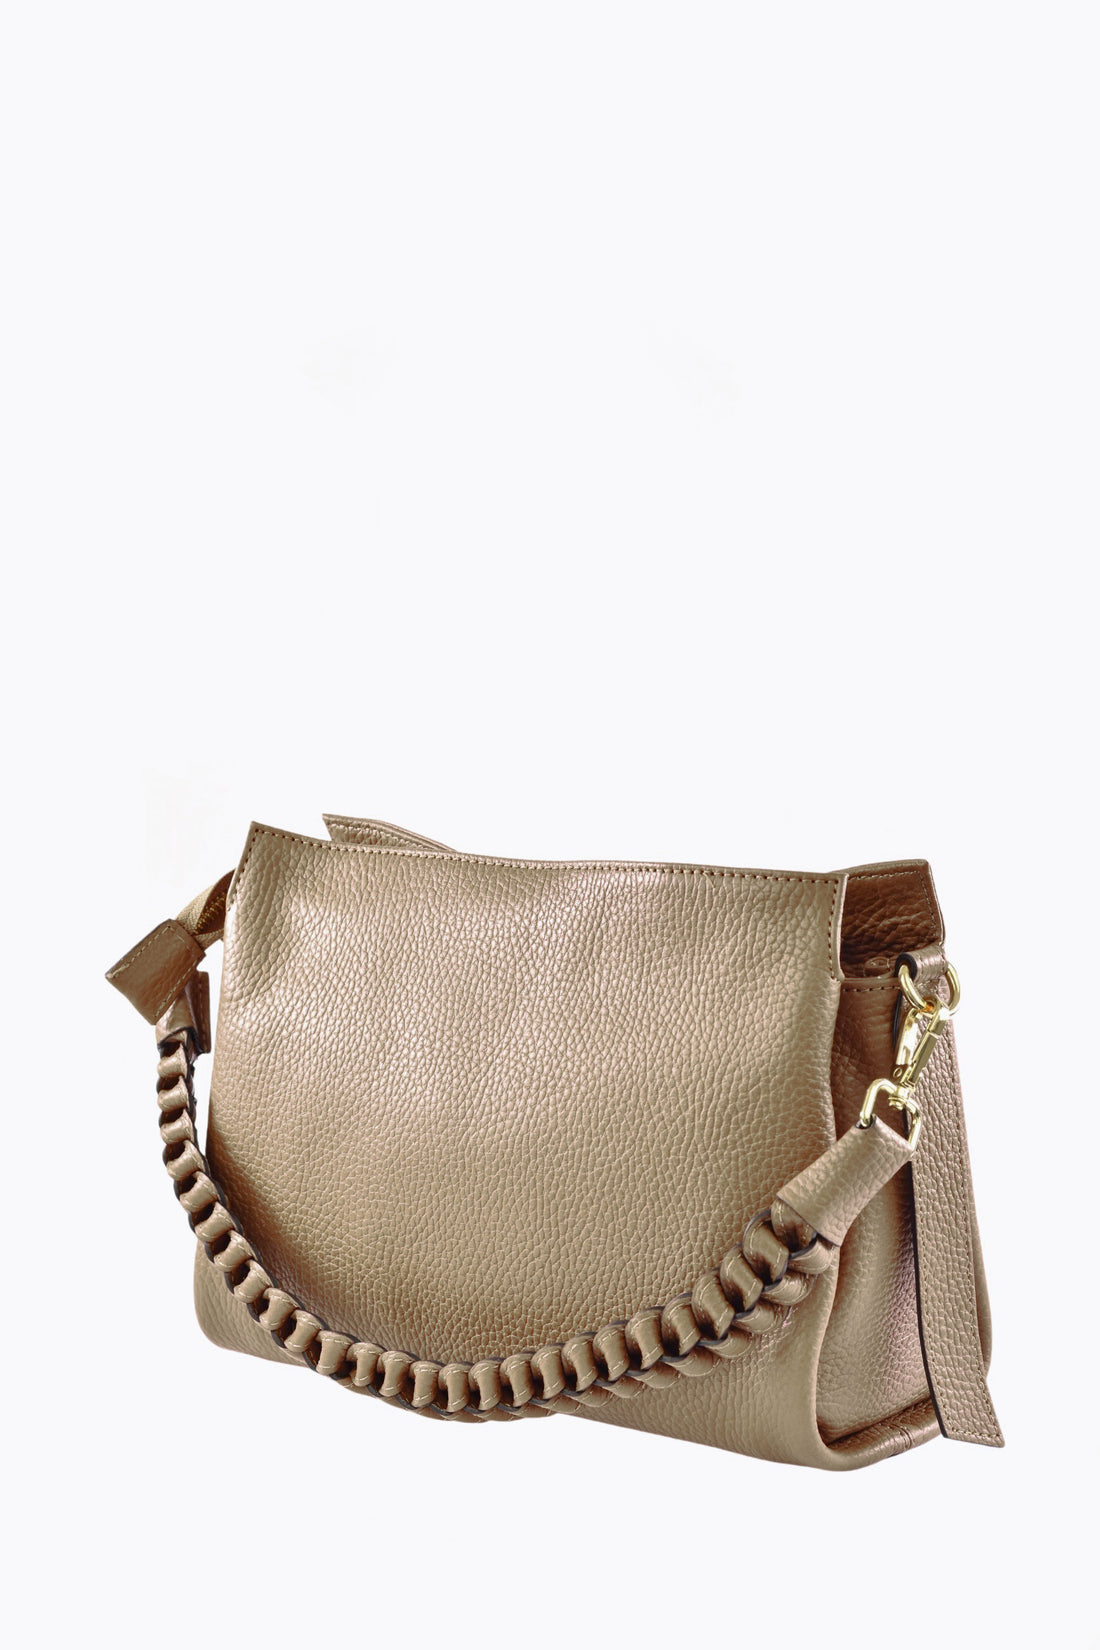 Braid Micro bag in Taupe Dollar leather